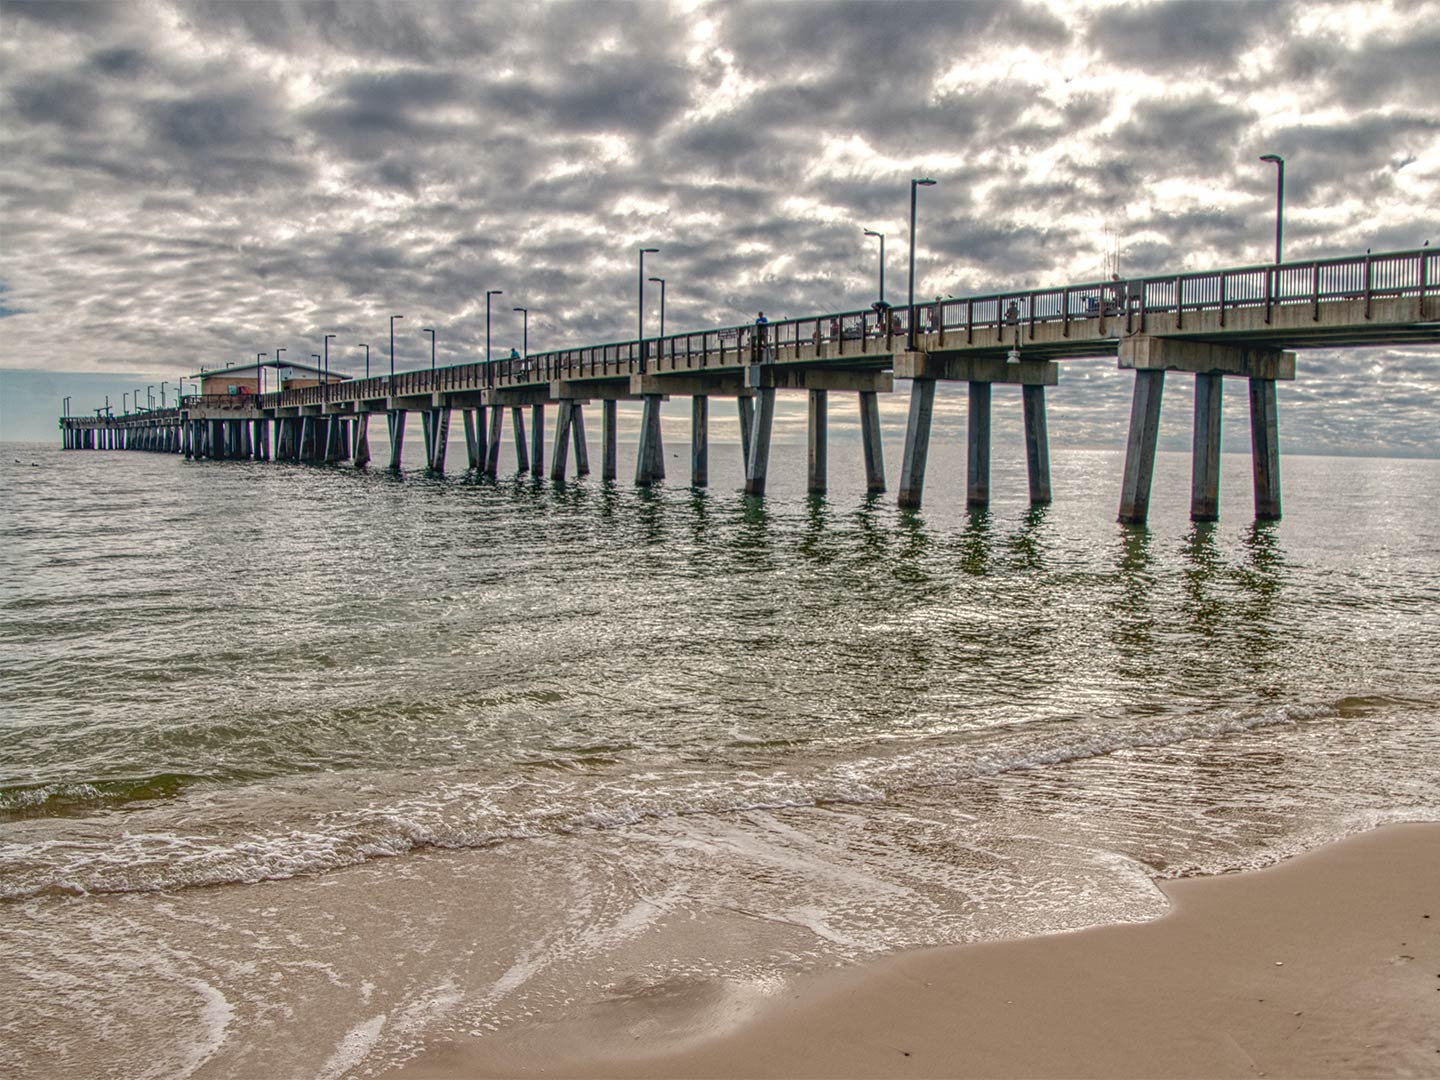 A view of the Gulf State Park Fishing Pier in Orange Beach on a cloudy day.